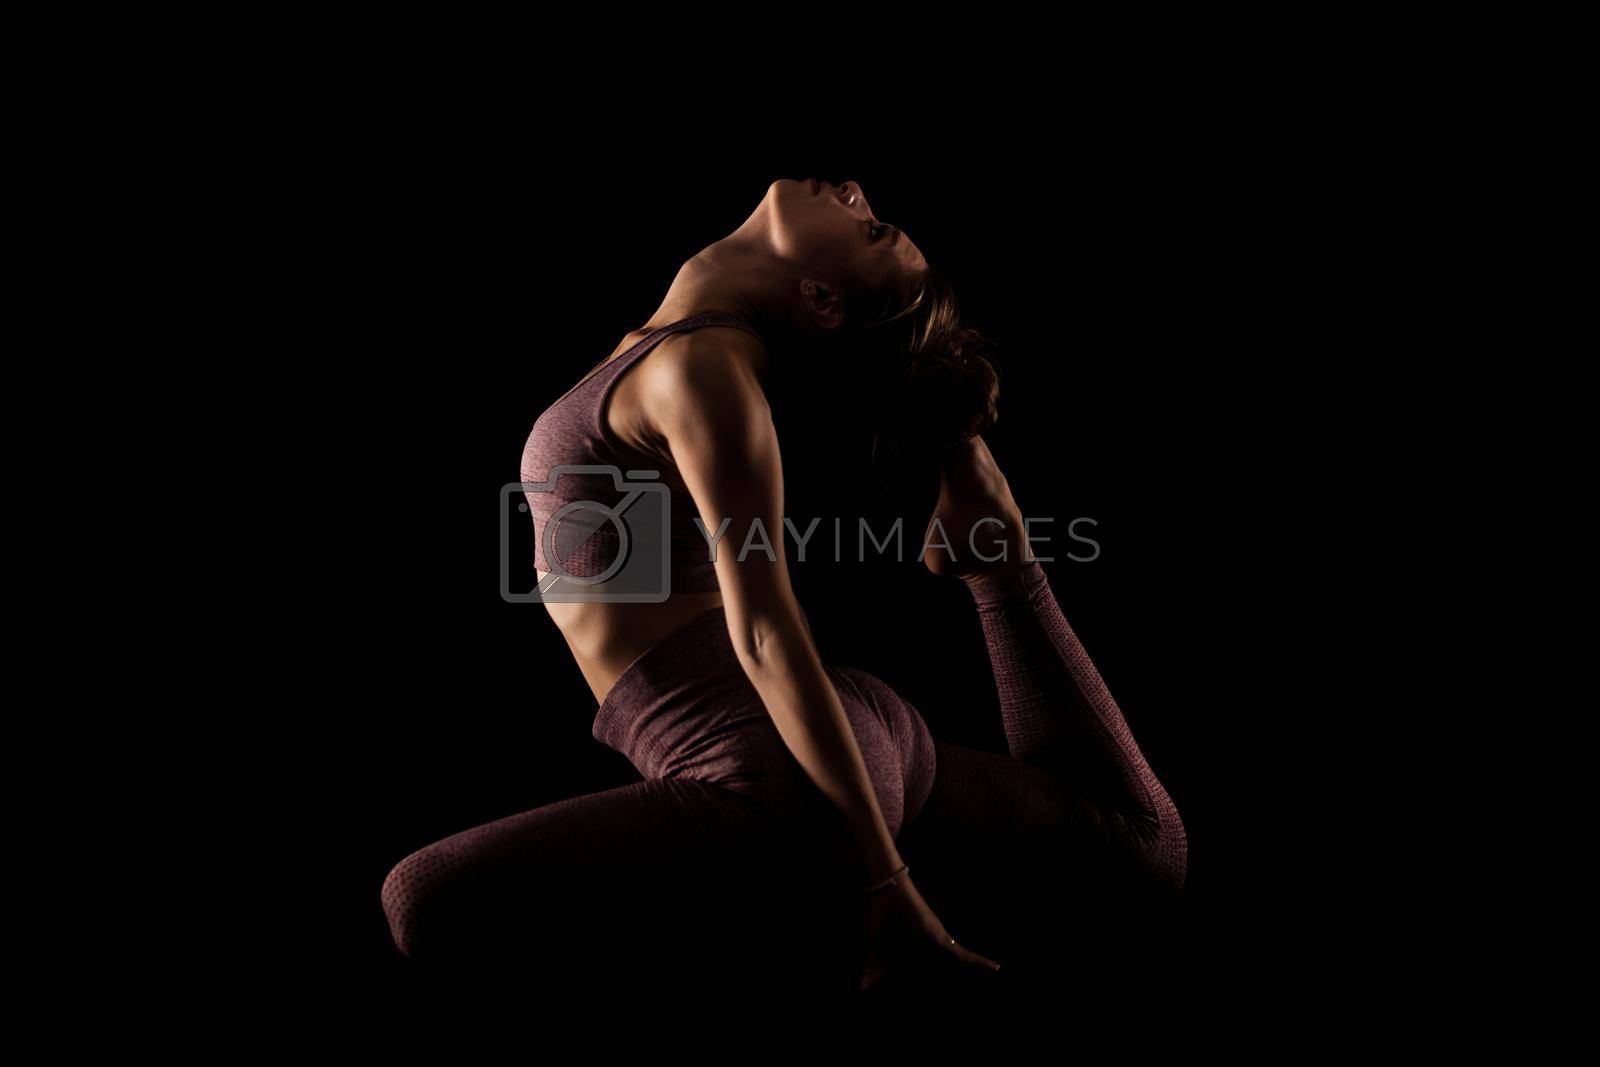 Fit woman practicing yoga poses. Side lit half silhouette girl doing exercise in studio against black background.